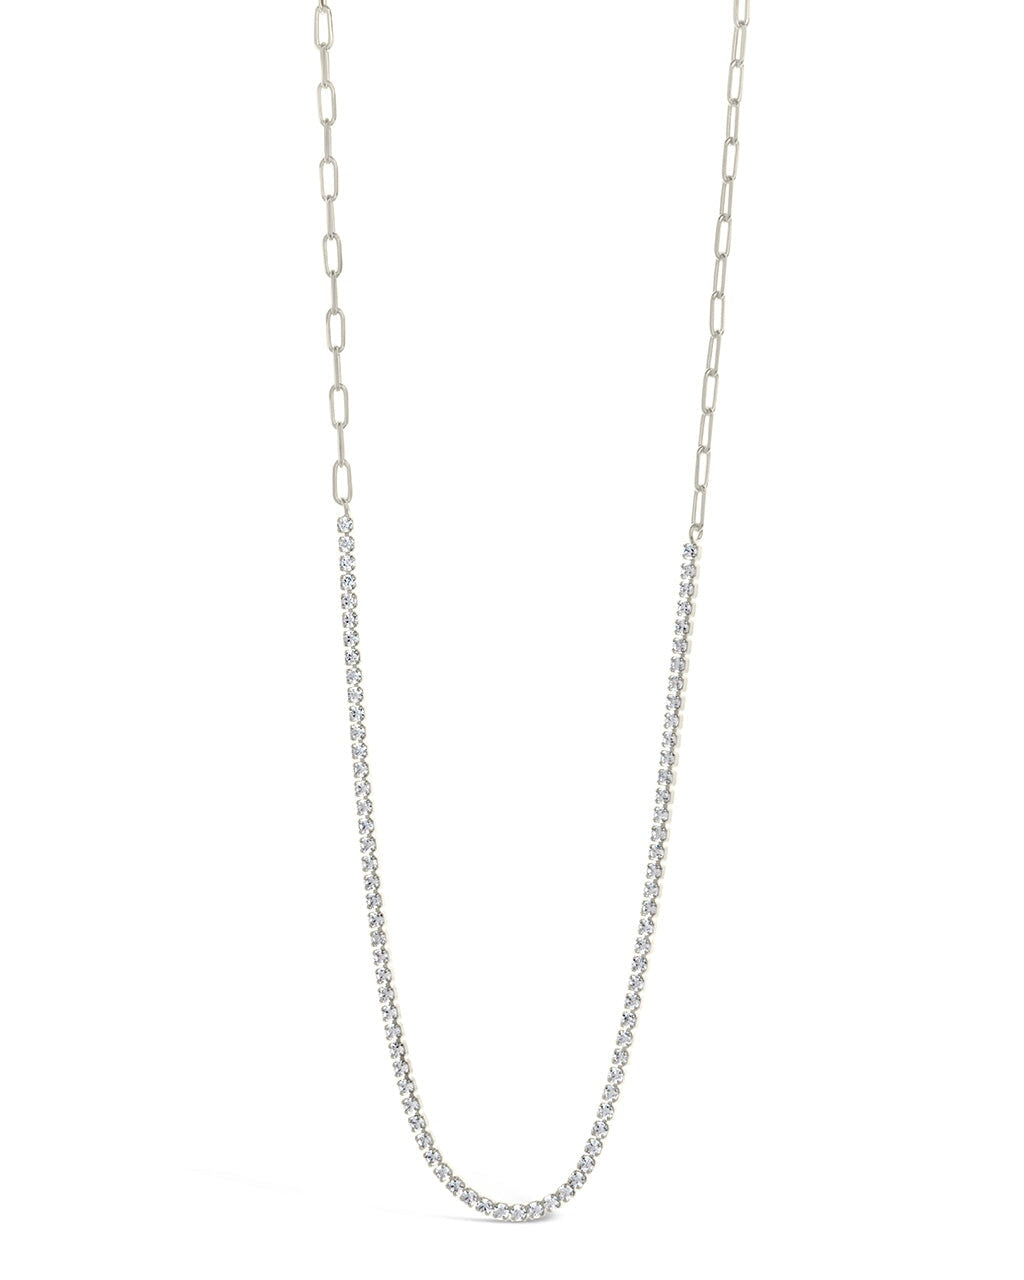 Dani Chain Necklace Necklace Sterling Forever Silver 